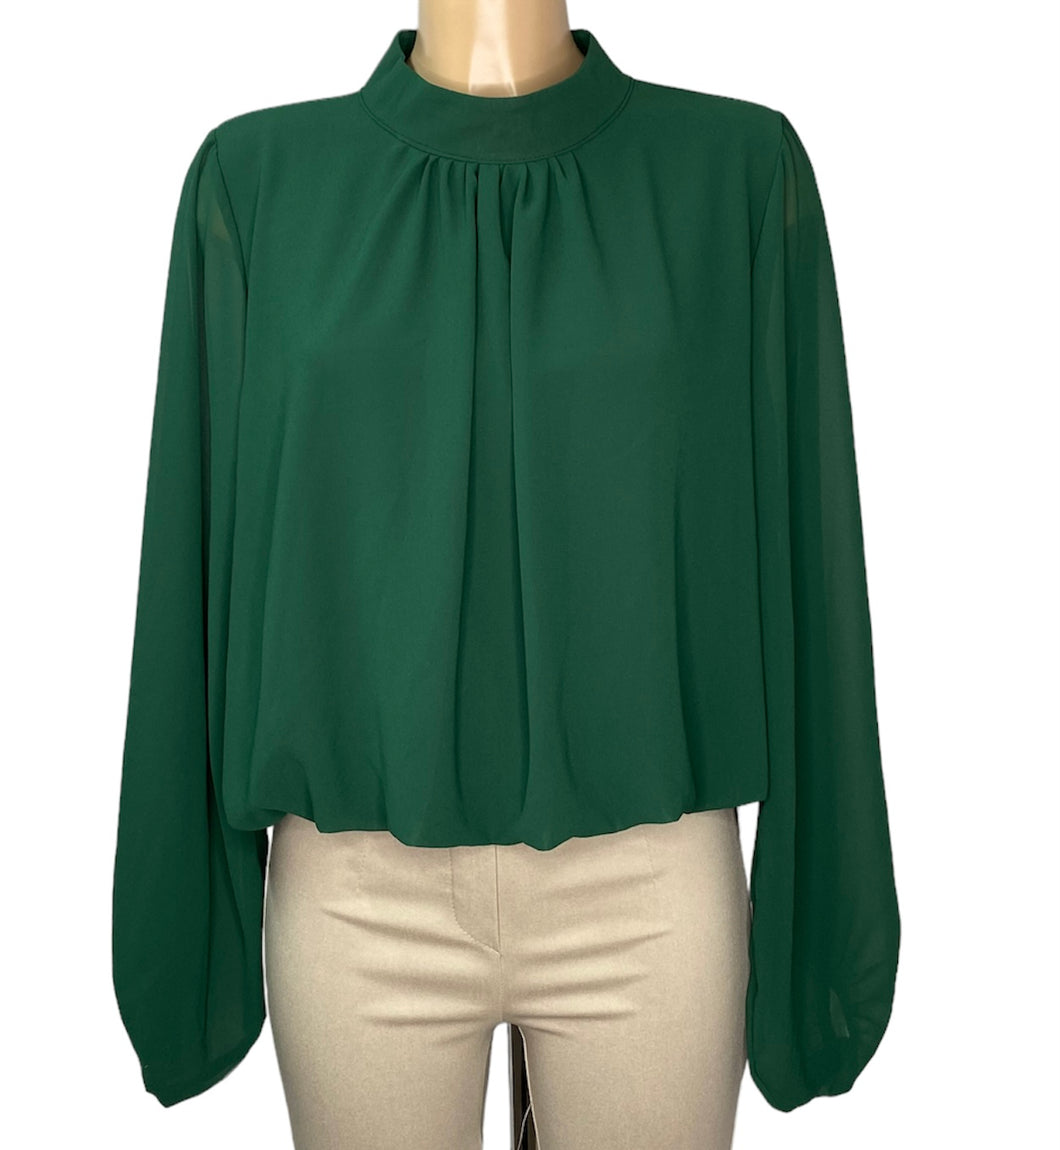 High Neck Bubble Hem Blouse (10 Colours) – Missy Online: Shoes, Fashion & Accessories  Based in Leeds